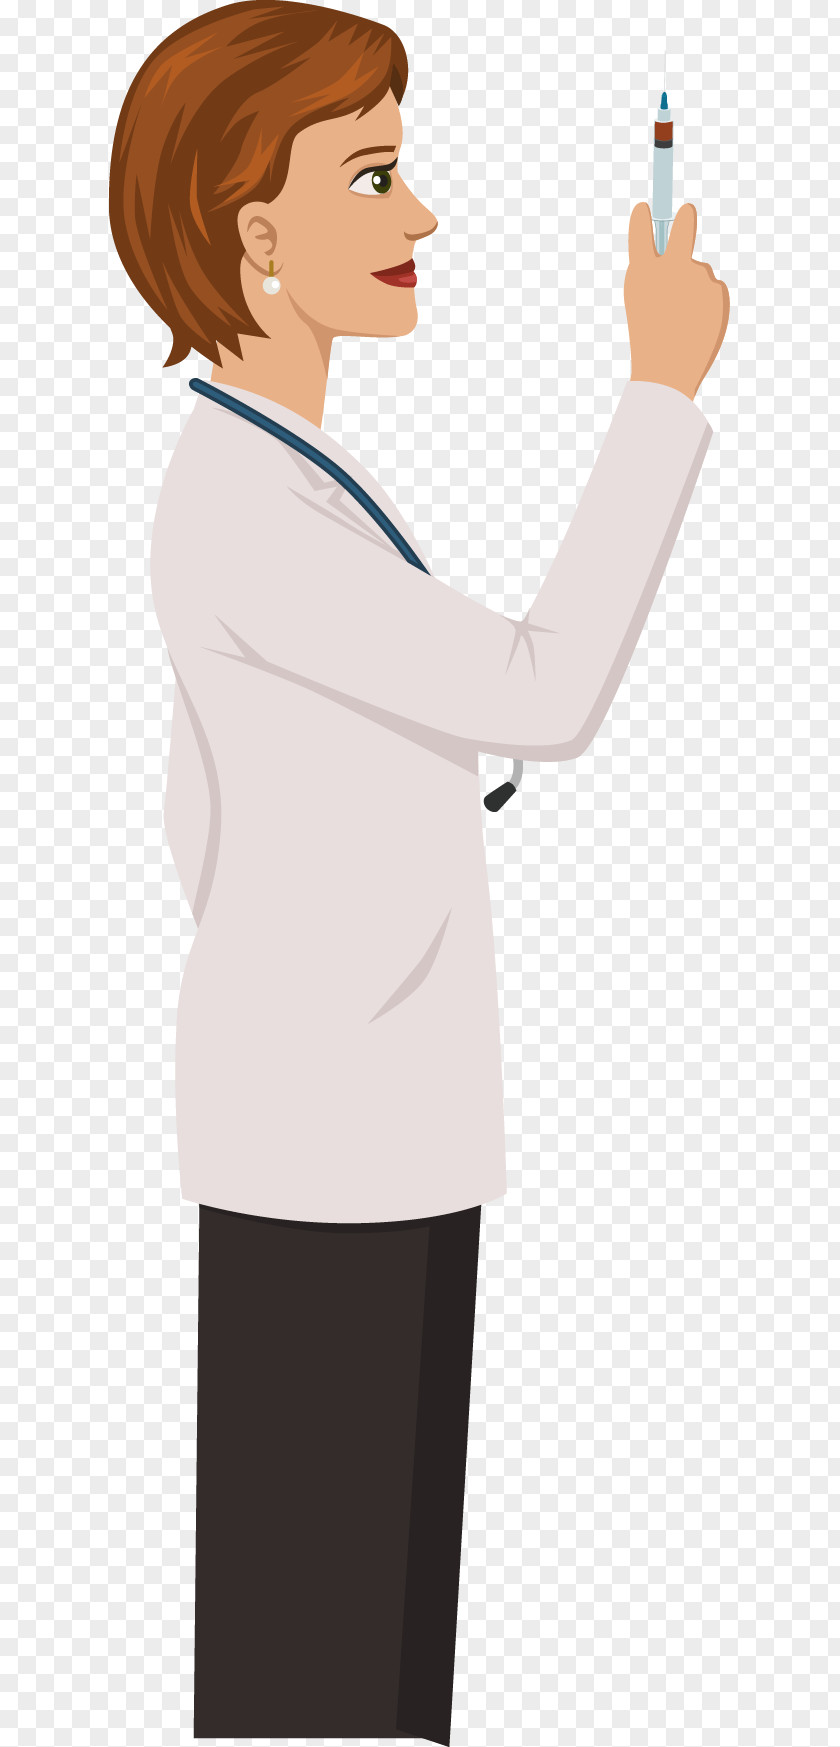 Cartoon Female Doctor Injections Physician Illustration PNG